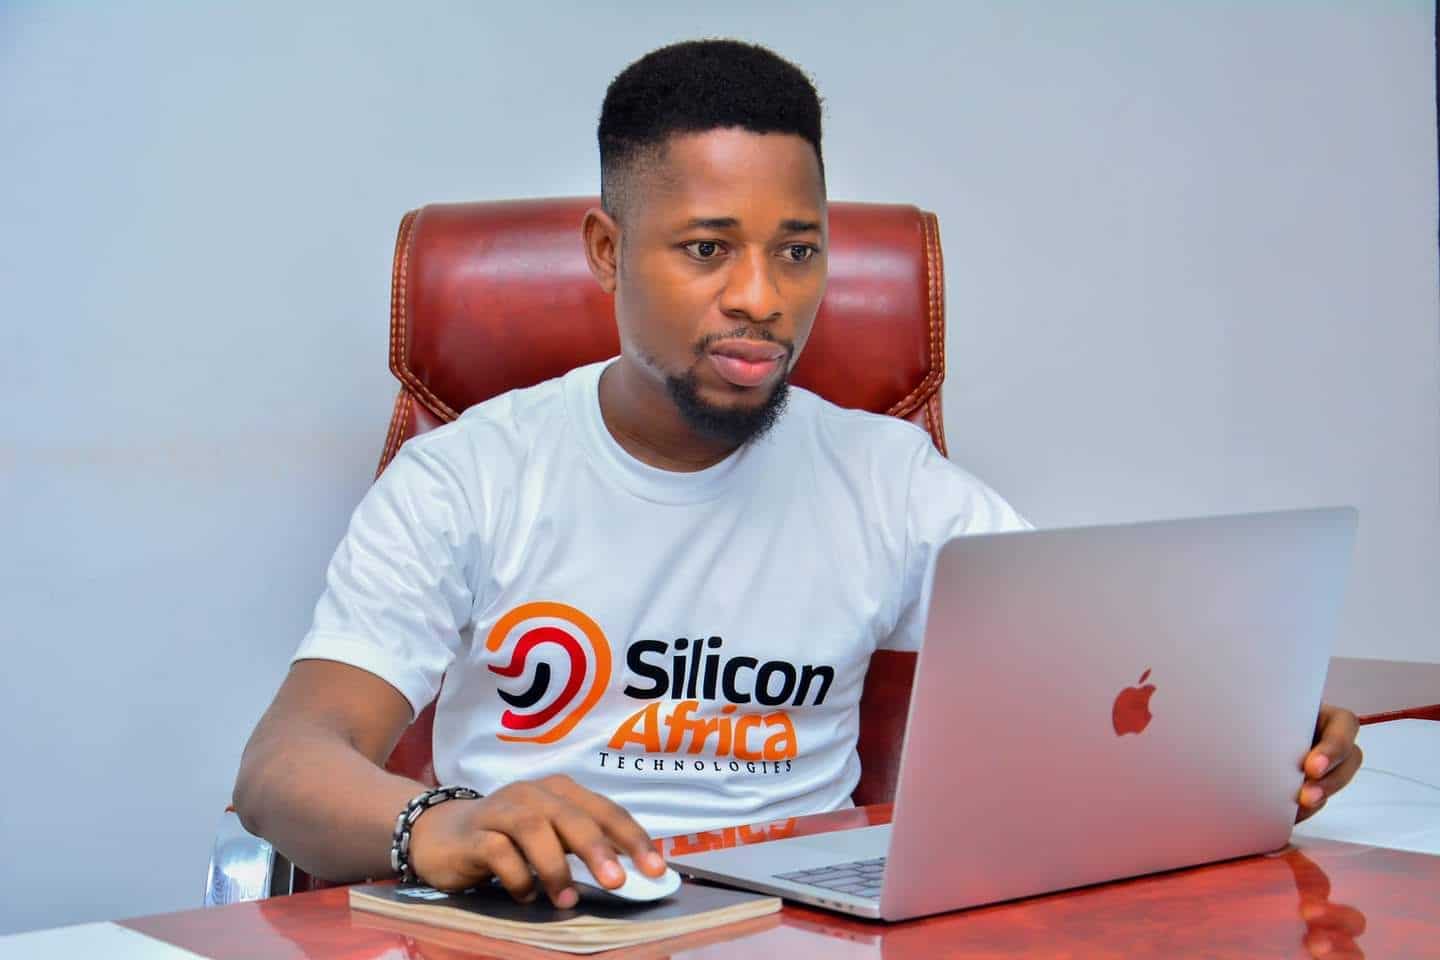 Ajah Excel CEO of Silicon African Technologies